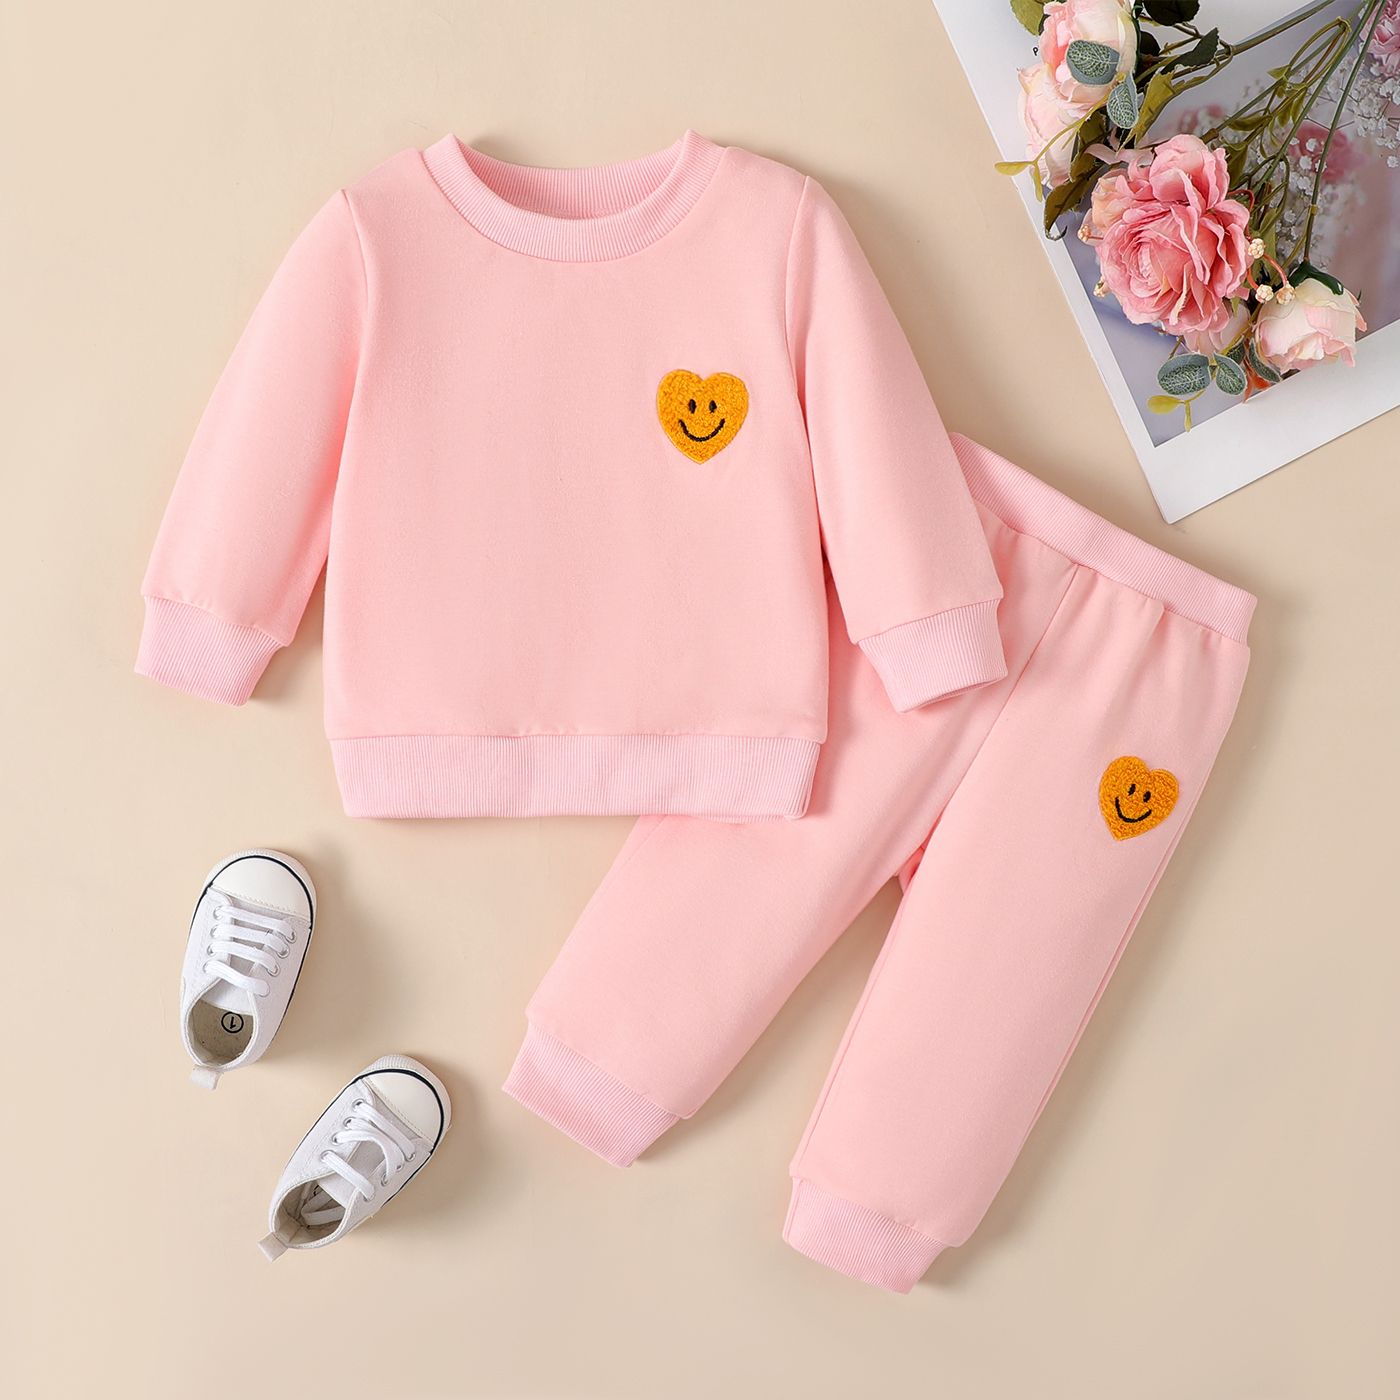 2pcs Baby Girl Smiling Heart Embroidered Pullover Sweatshirt And Pants Set